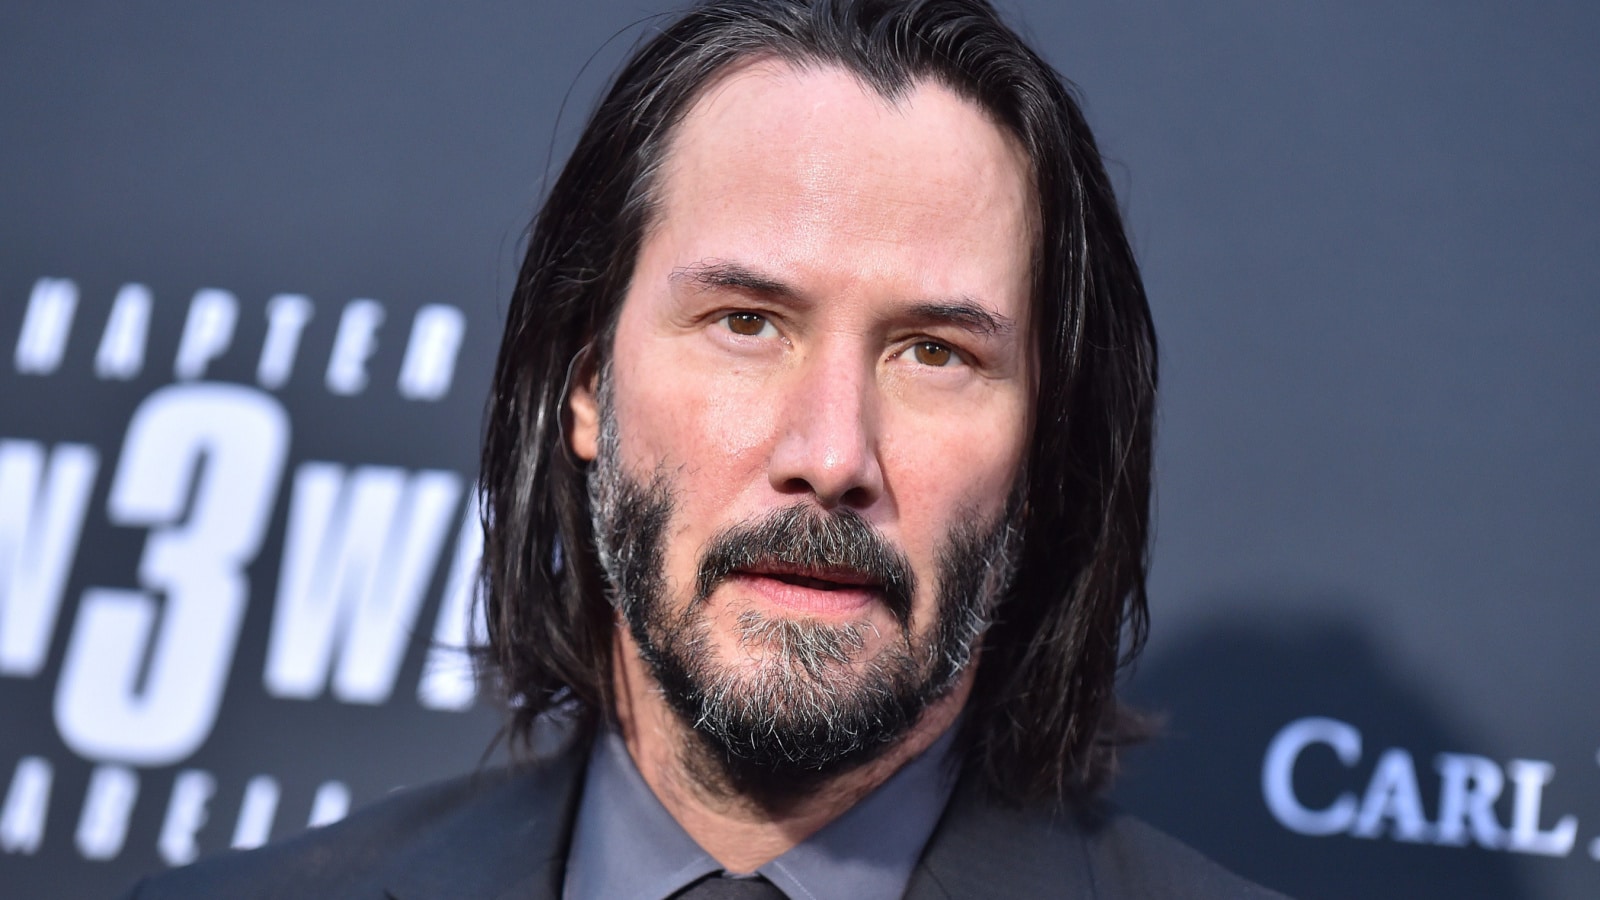 LOS ANGELES - MAY 15: Keanu Reeves arrives for the John Wick: Chapter 3 - Parabellum' L.A. Special Screening on May 15, 2019 in Hollywood, CA